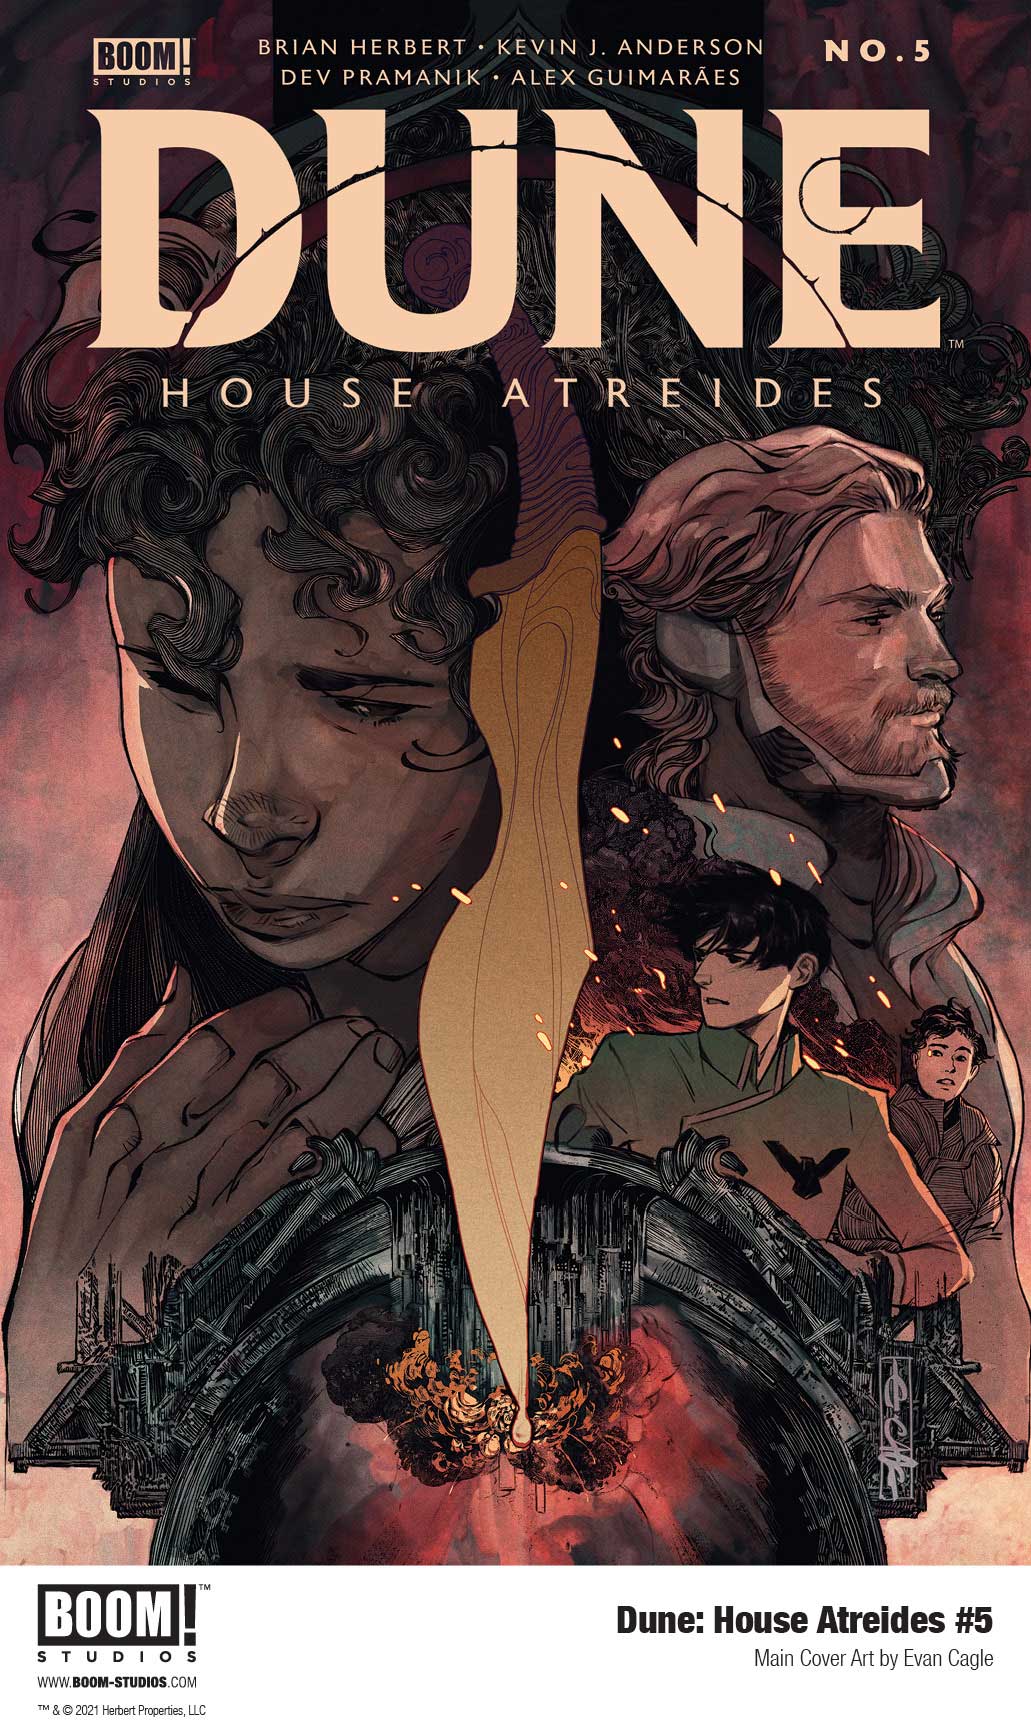 Dune: House Atreides comic series. Main cover of issue #5 by Evan Cagle.